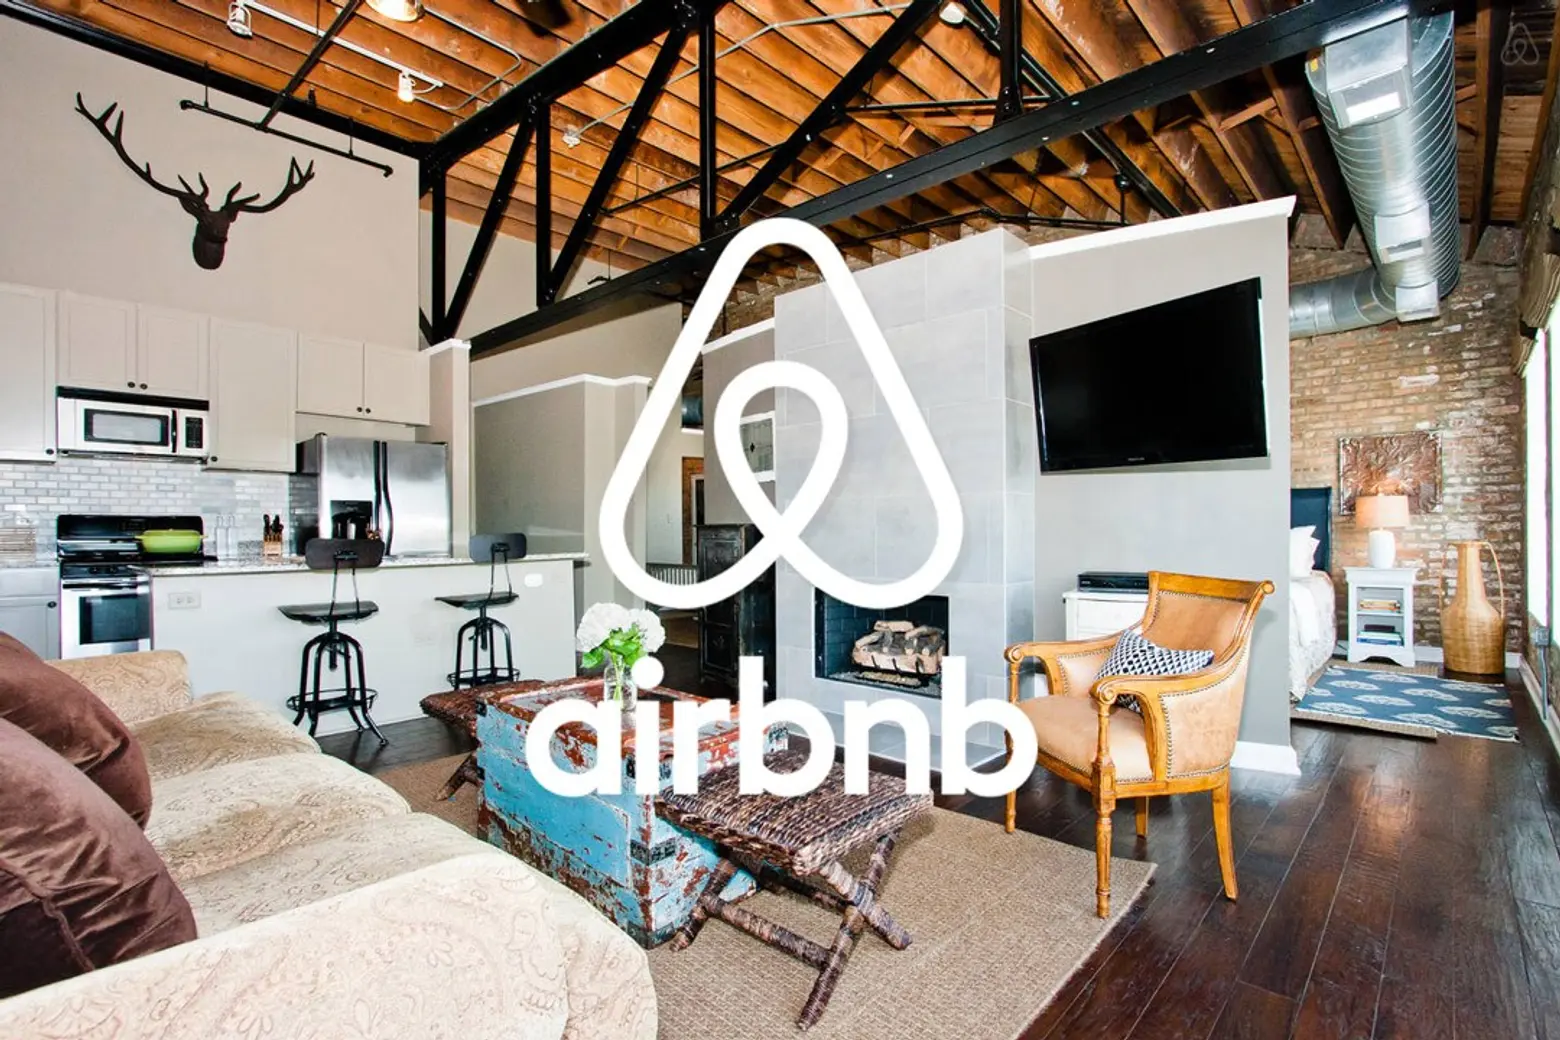 The hotel industry prepares a national fight against Airbnb